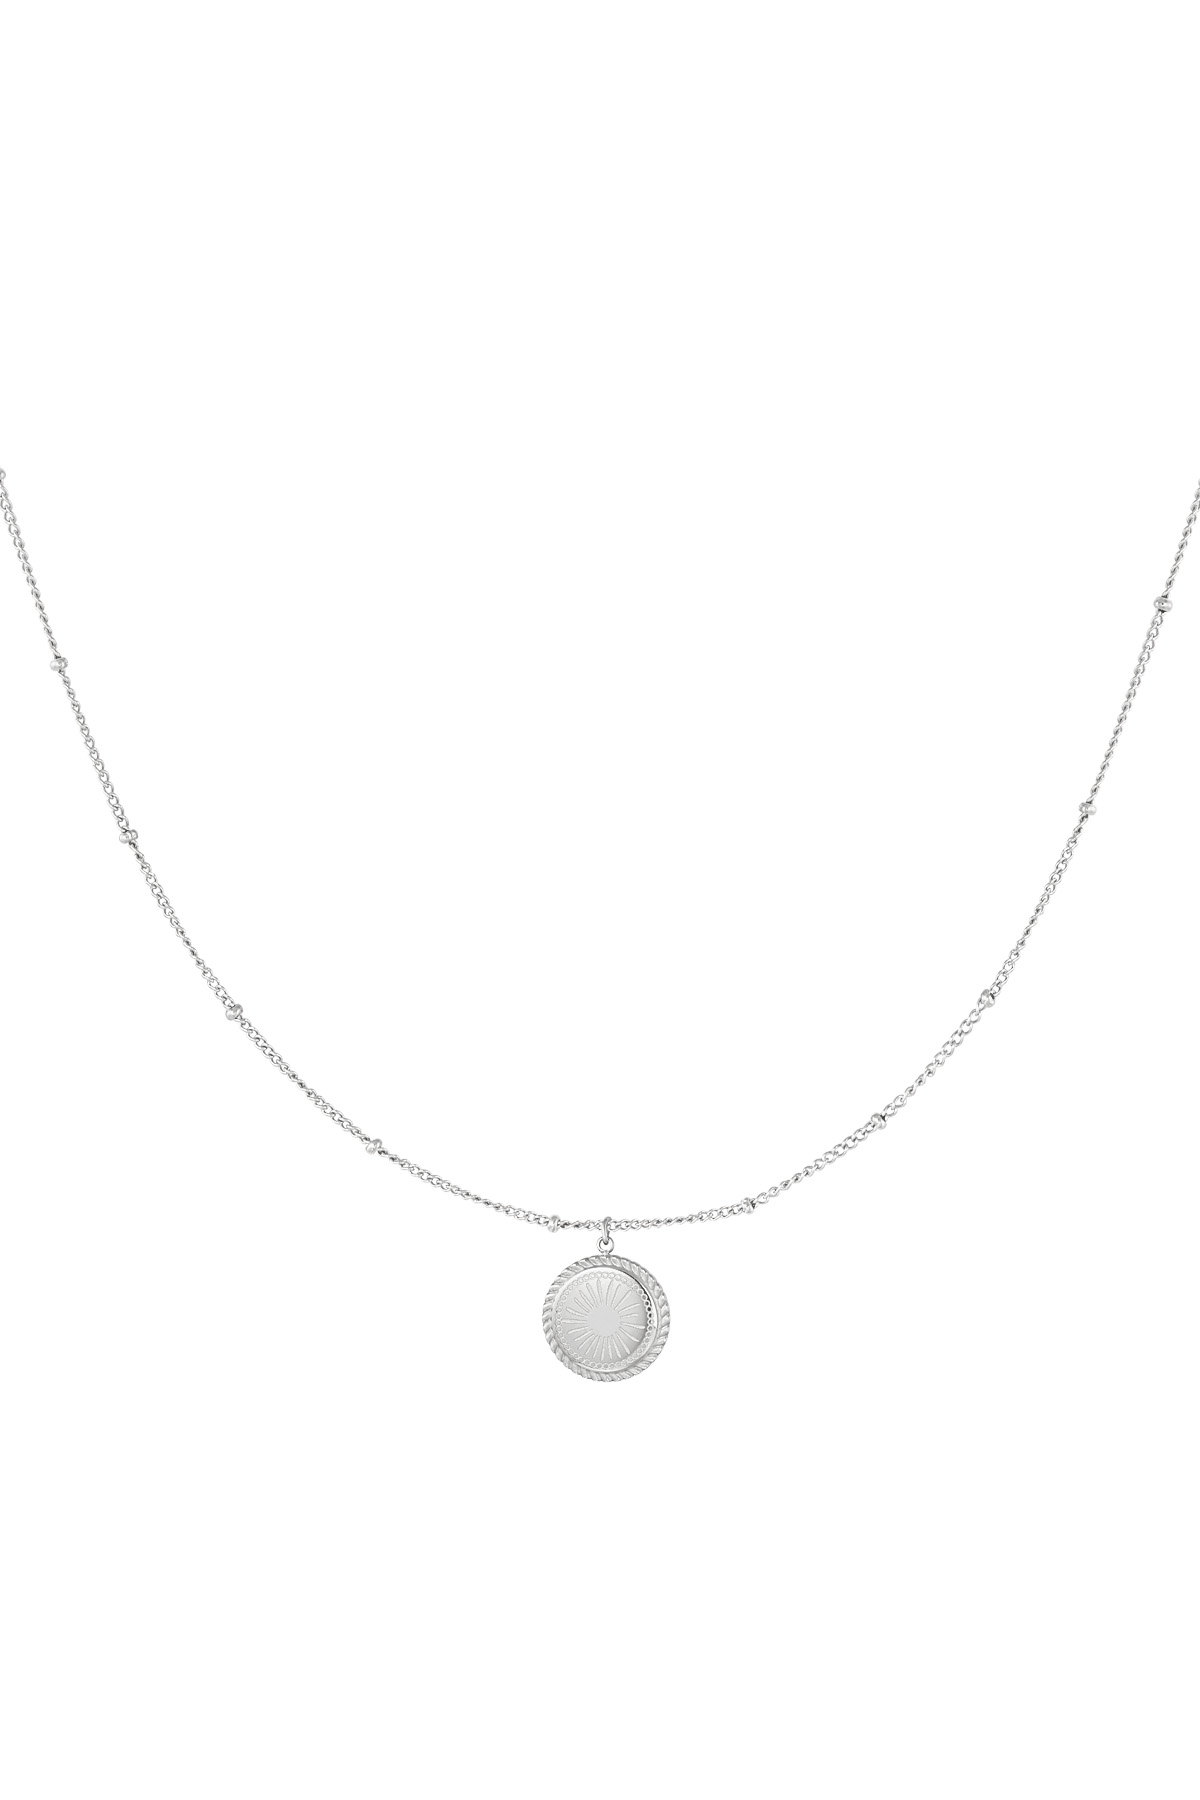 Necklace double round coin - silver 